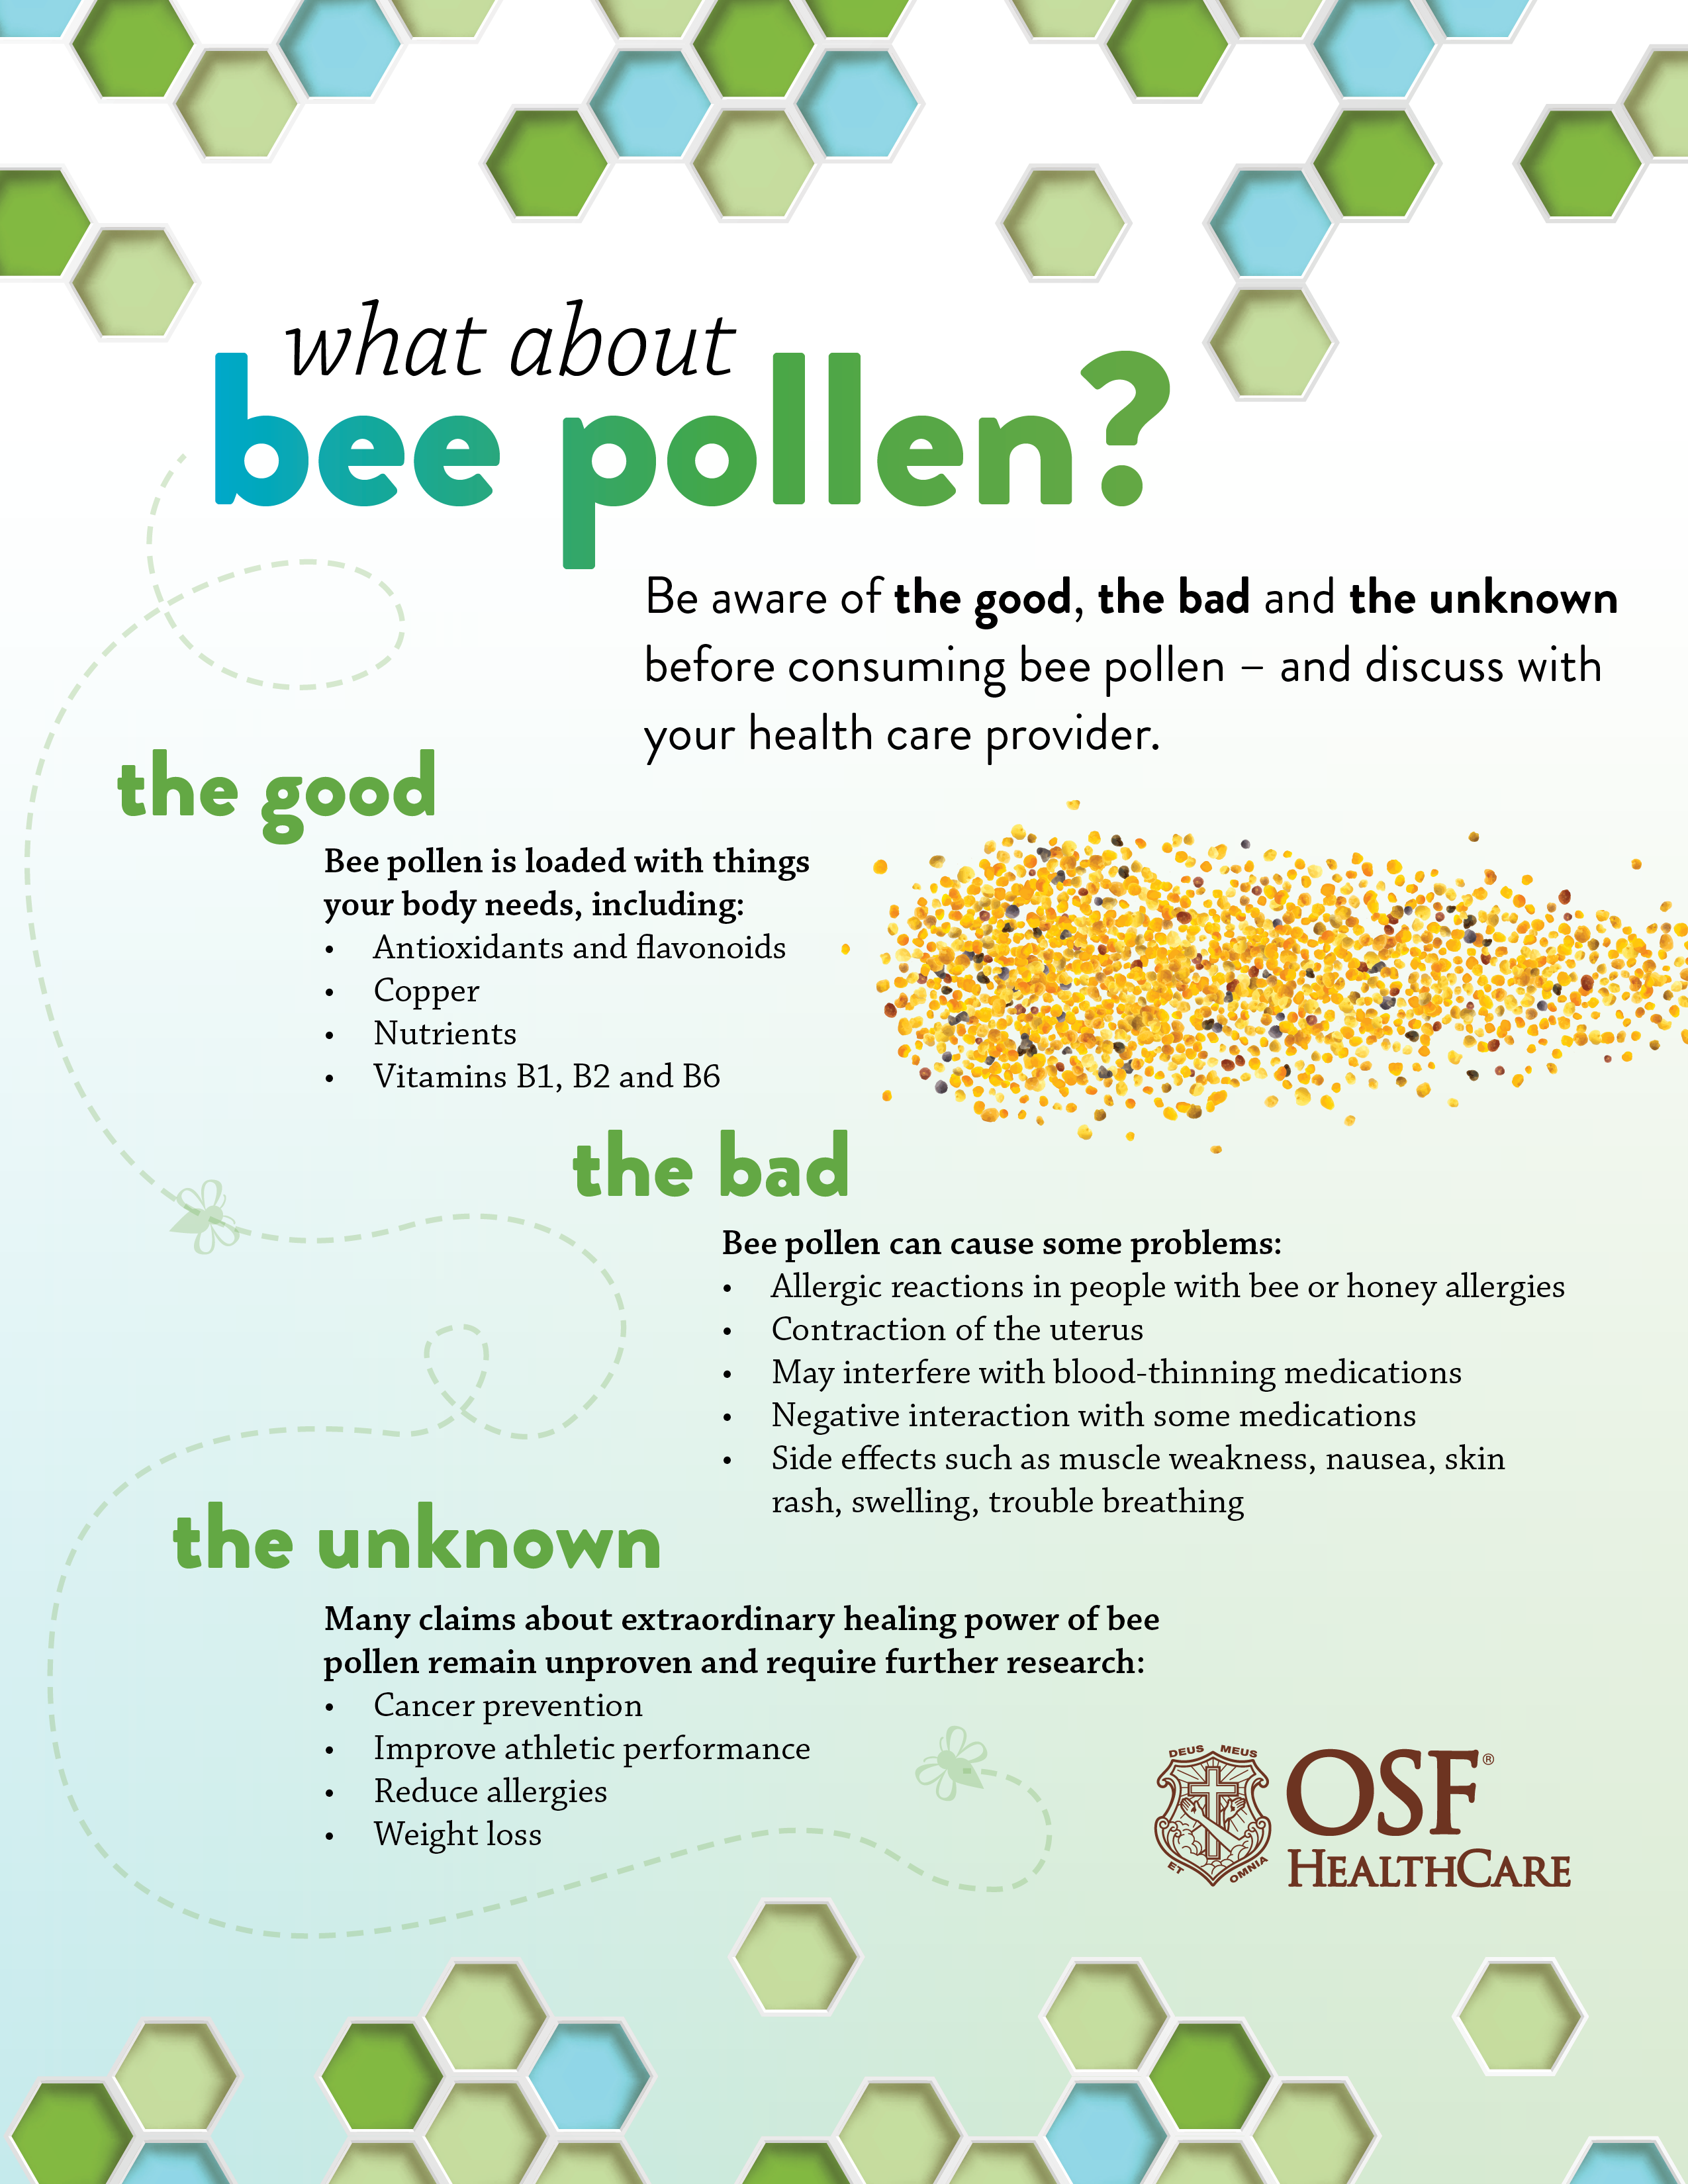 About the benefits and dangers of pollen